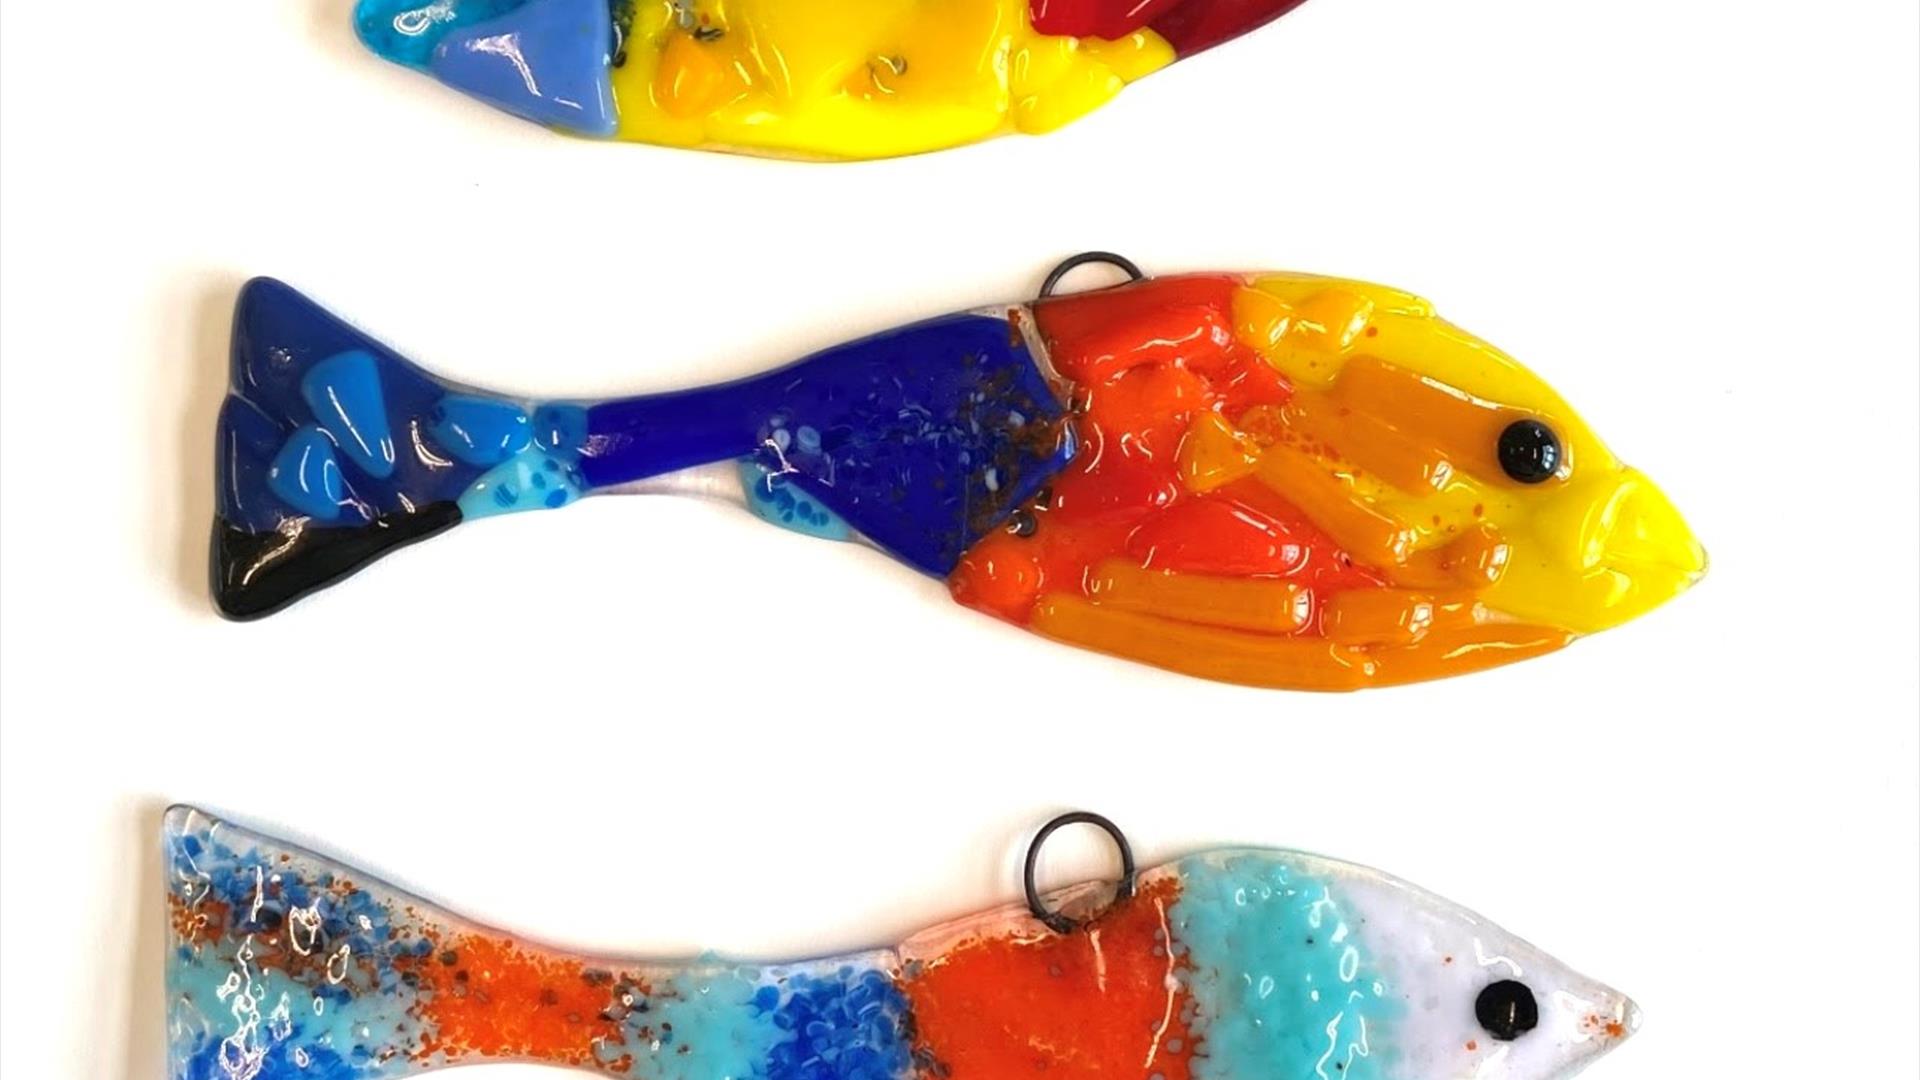 Image shows three brightly coloured fish made from fused glass, one on top of the other